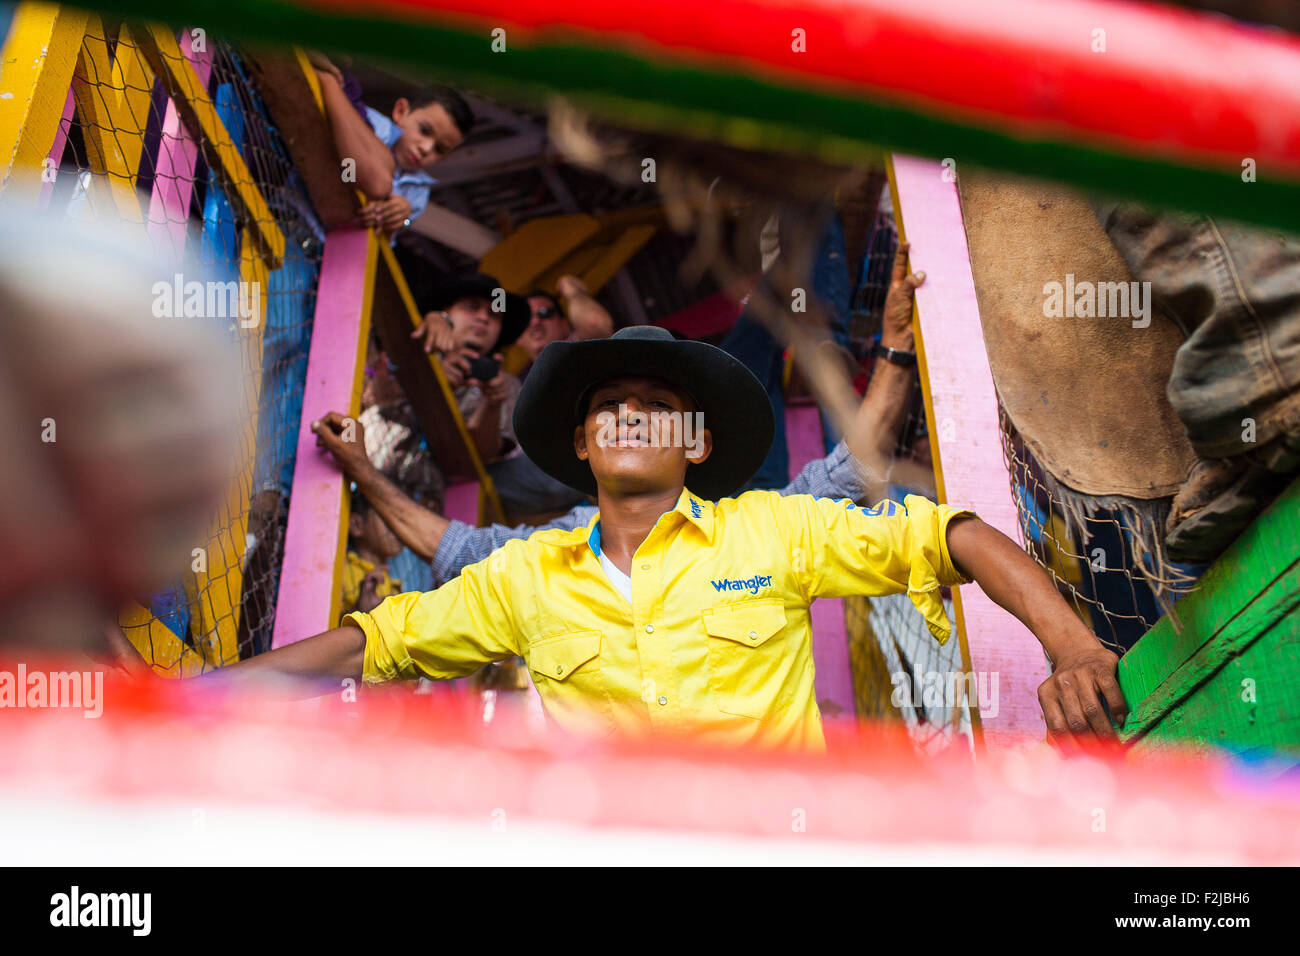 The rider prepares to be released during the annual fiesta in Juigalpa, Nicaragua. The crowd cheers and encourages his machismo. Stock Photo